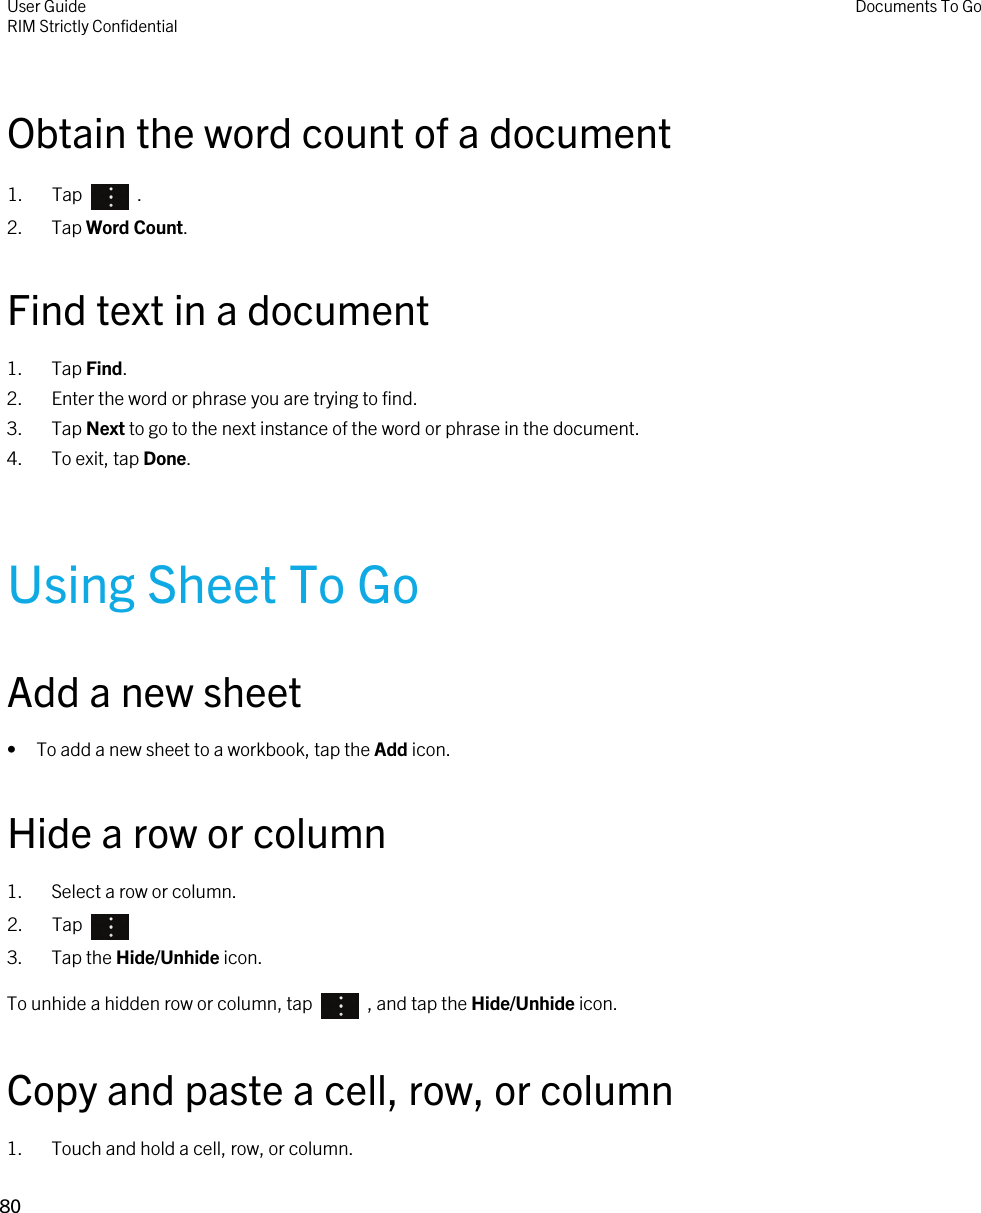 Obtain the word count of a document1.  Tap    .2. Tap Word Count.Find text in a document1. Tap Find.2. Enter the word or phrase you are trying to find.3. Tap Next to go to the next instance of the word or phrase in the document.4. To exit, tap Done.Using Sheet To GoAdd a new sheet• To add a new sheet to a workbook, tap the Add icon.Hide a row or column1. Select a row or column.2.  Tap 3. Tap the Hide/Unhide icon.To unhide a hidden row or column, tap    , and tap the Hide/Unhide icon.Copy and paste a cell, row, or column1. Touch and hold a cell, row, or column.User GuideRIM Strictly Confidential Documents To Go80 